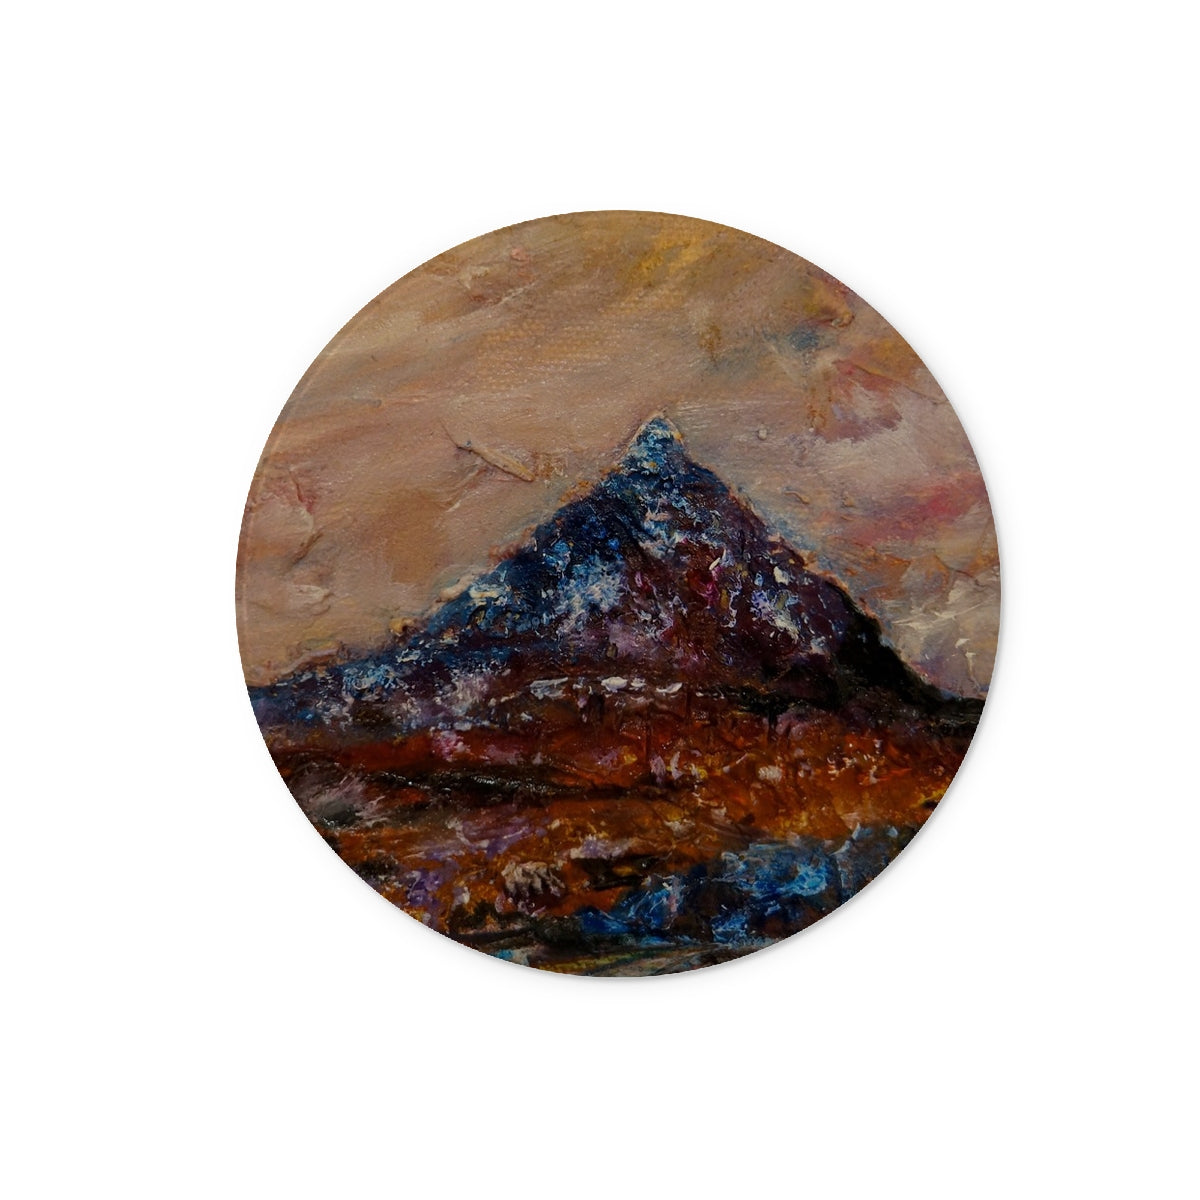 Buachaille Etive Mòr Art Gifts Glass Chopping Board-Glass Chopping Boards-Glencoe Art Gallery-12" Round-Paintings, Prints, Homeware, Art Gifts From Scotland By Scottish Artist Kevin Hunter